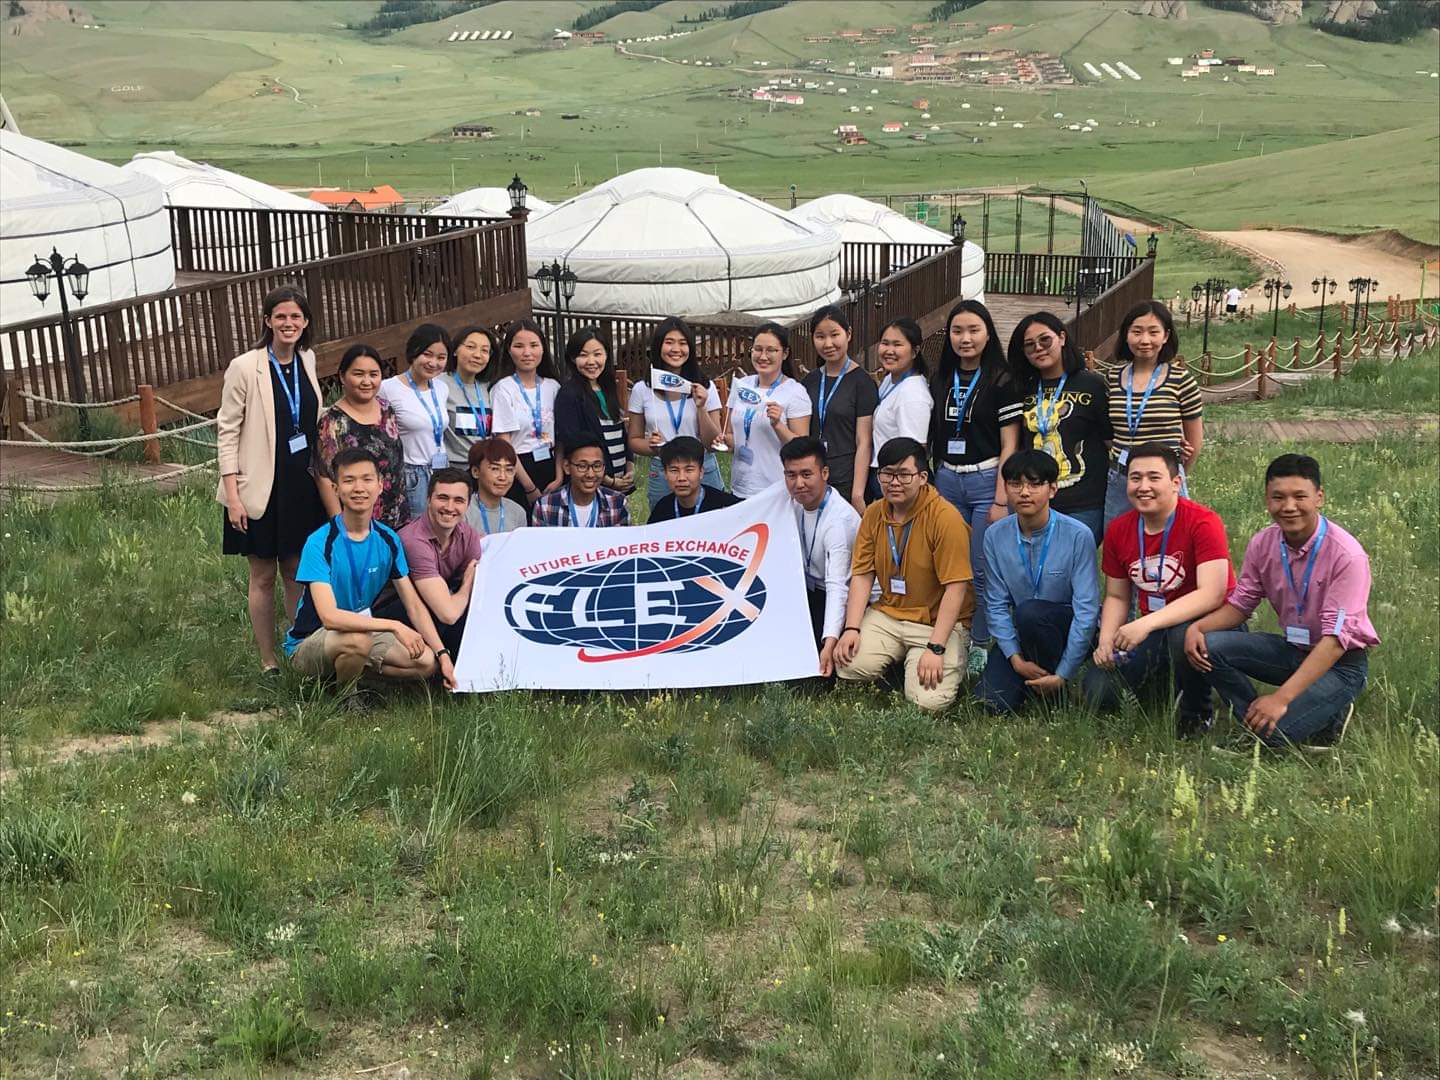 Munkhsuld Narangerel (Suldee) takes a picture with Future Leaders Exchange (FLEX). The flex program allows students to attend international schooling.